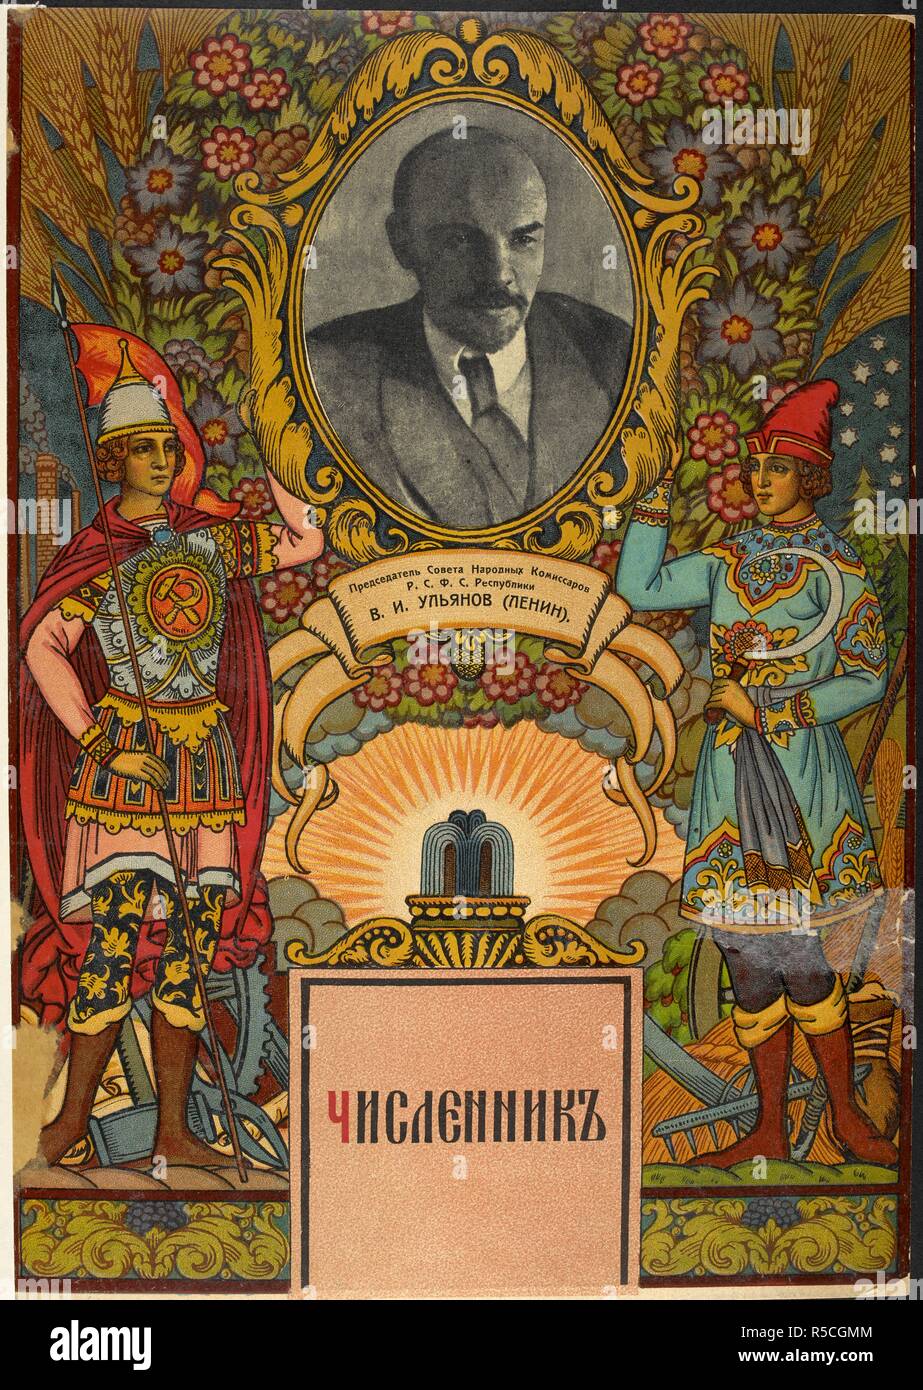 Calendar. V.I.Ul'ianov (Lenin), Chairman of the Soviet of People's Commissars.  A portrait of Lenin, surrounded by two figures - in a fairy-tale style -  representing industry and agriculture. Possibly the cover for a diary or  calendar. A collection of posters issued by the Soviet Soviet government, 1918-1921. 1918-1921. Calendar. V.I.Ul'ianov (Lenin), Chairman of the Soviet of People's Commissars.   . Source: Cup.645.a.6.(65). Language: Russian. Author: ANON. Stock Photo